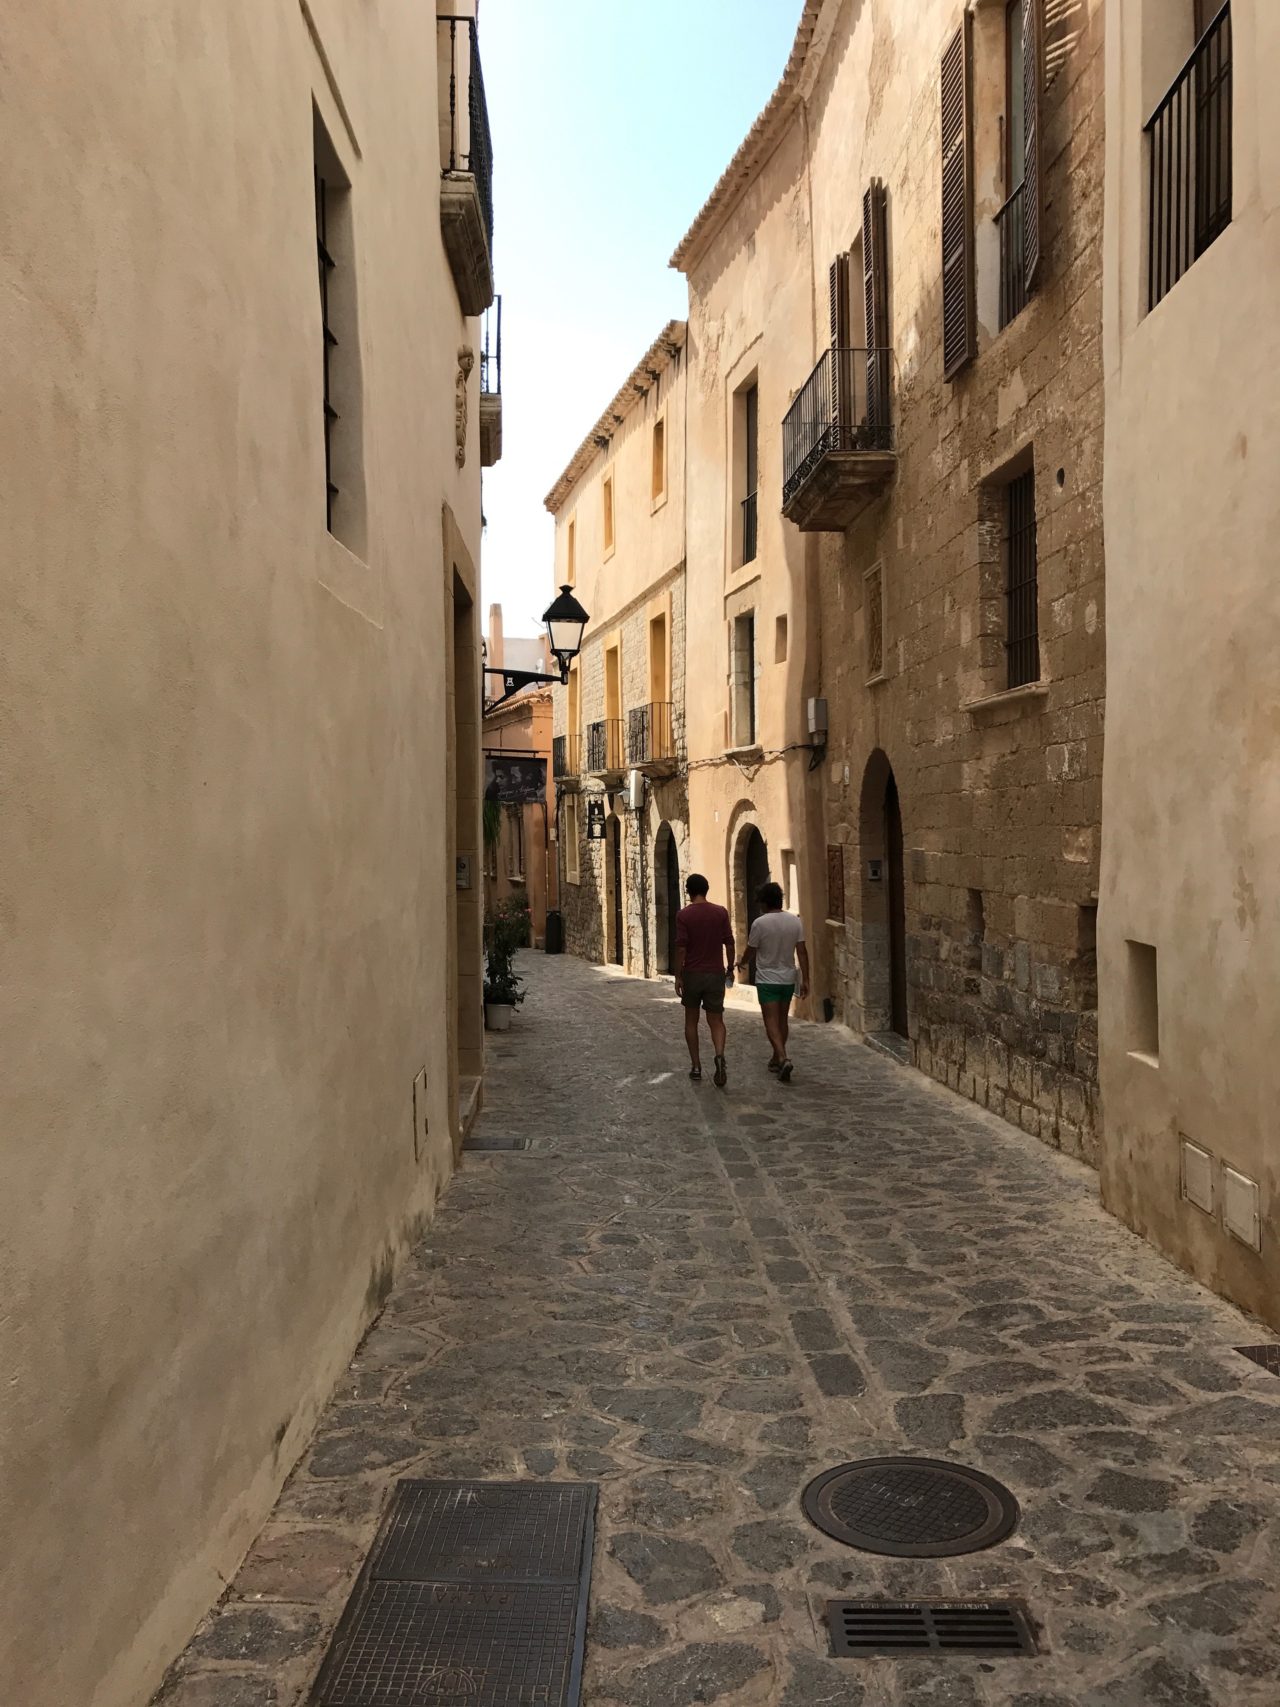 Narrow Street With Doors And Windows And People Walking On Cobblestone